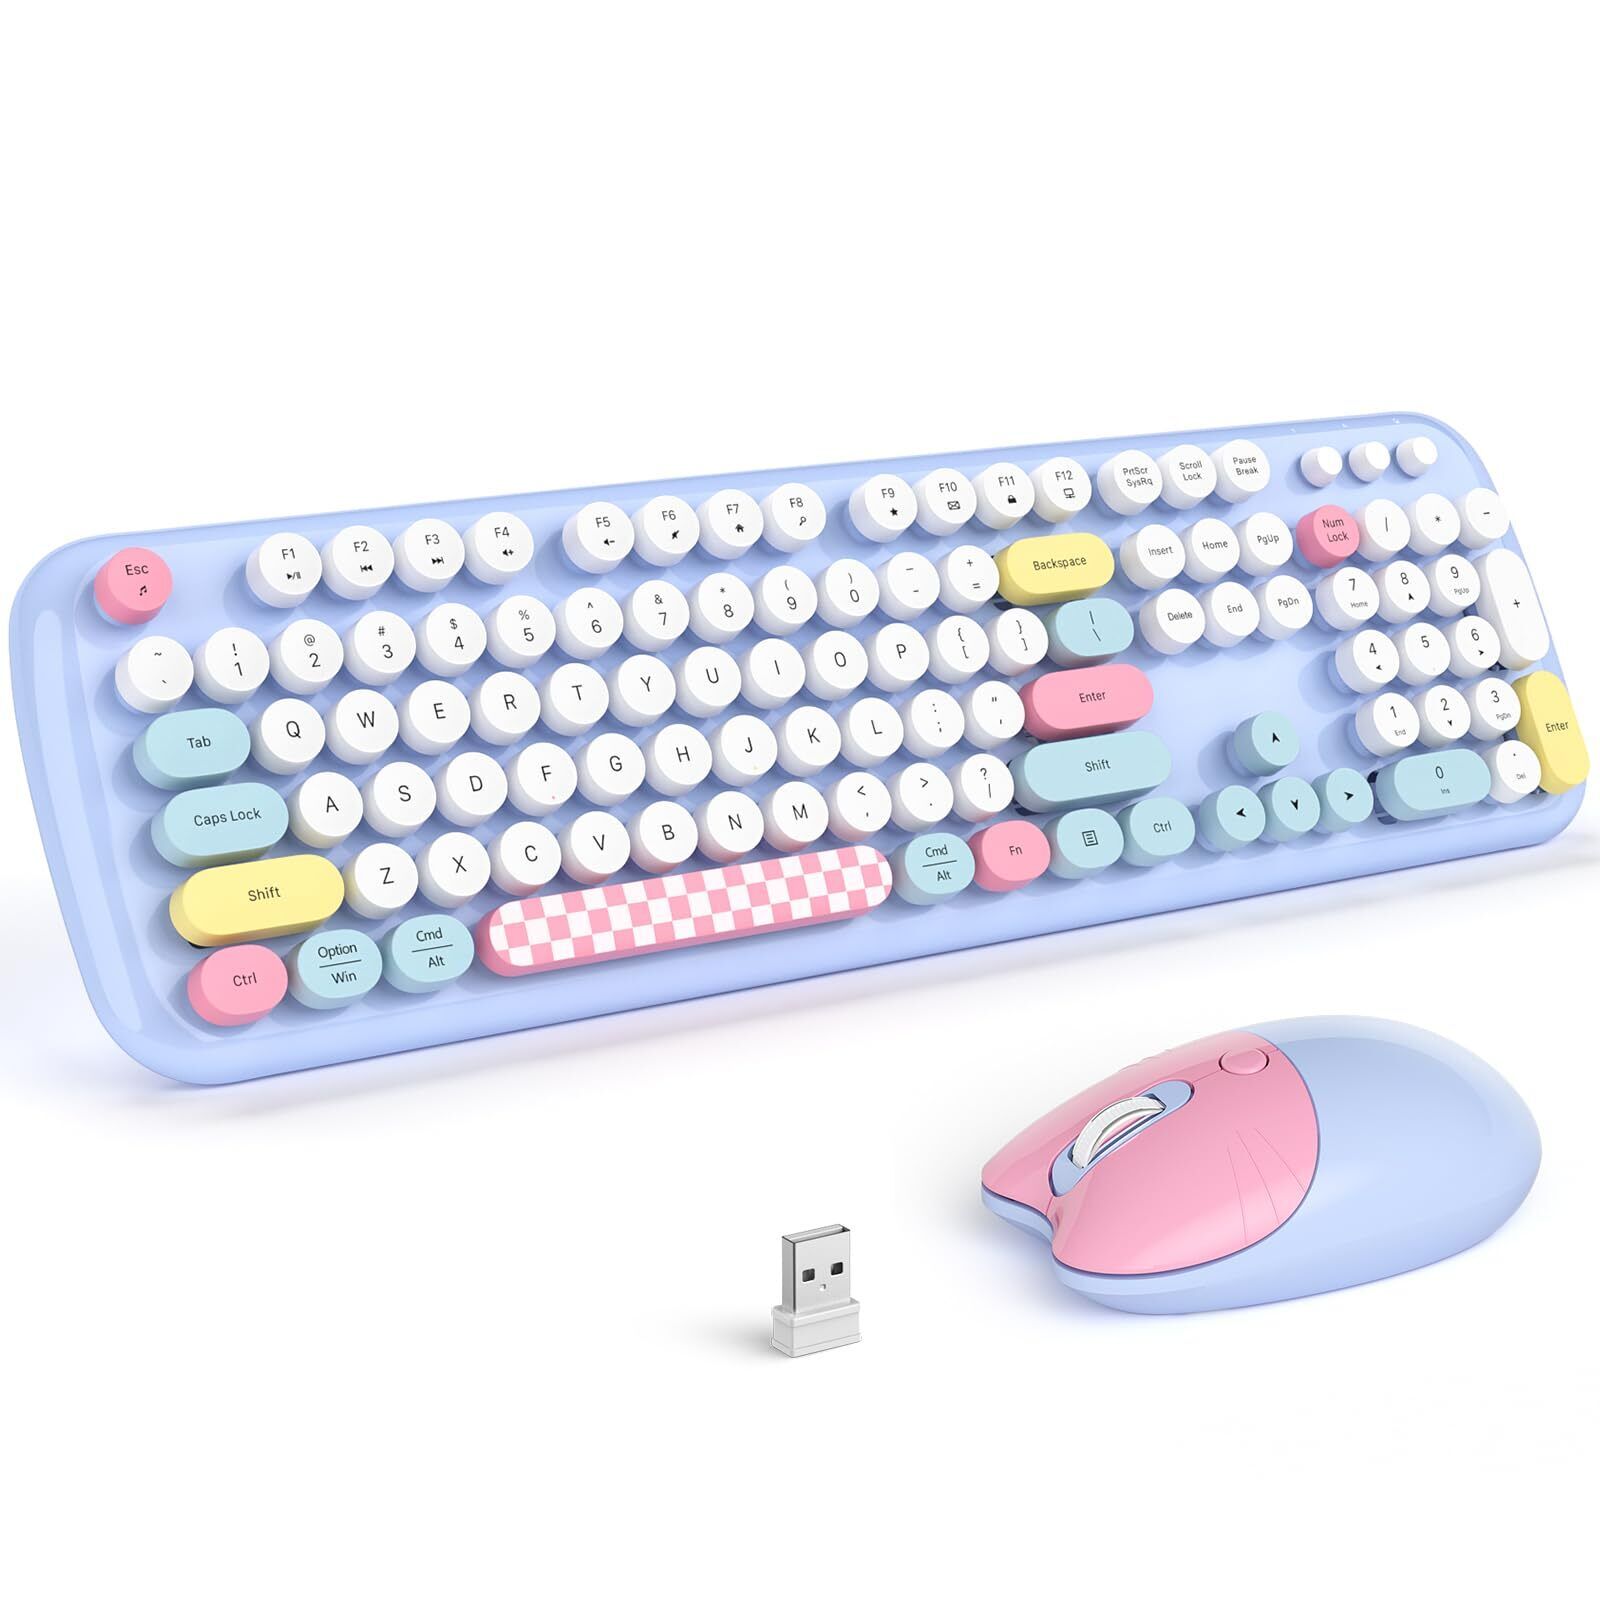 Wireless Keyboard and Mouse, Full Size Typewriter Keyboard and Cute Cat Shape...